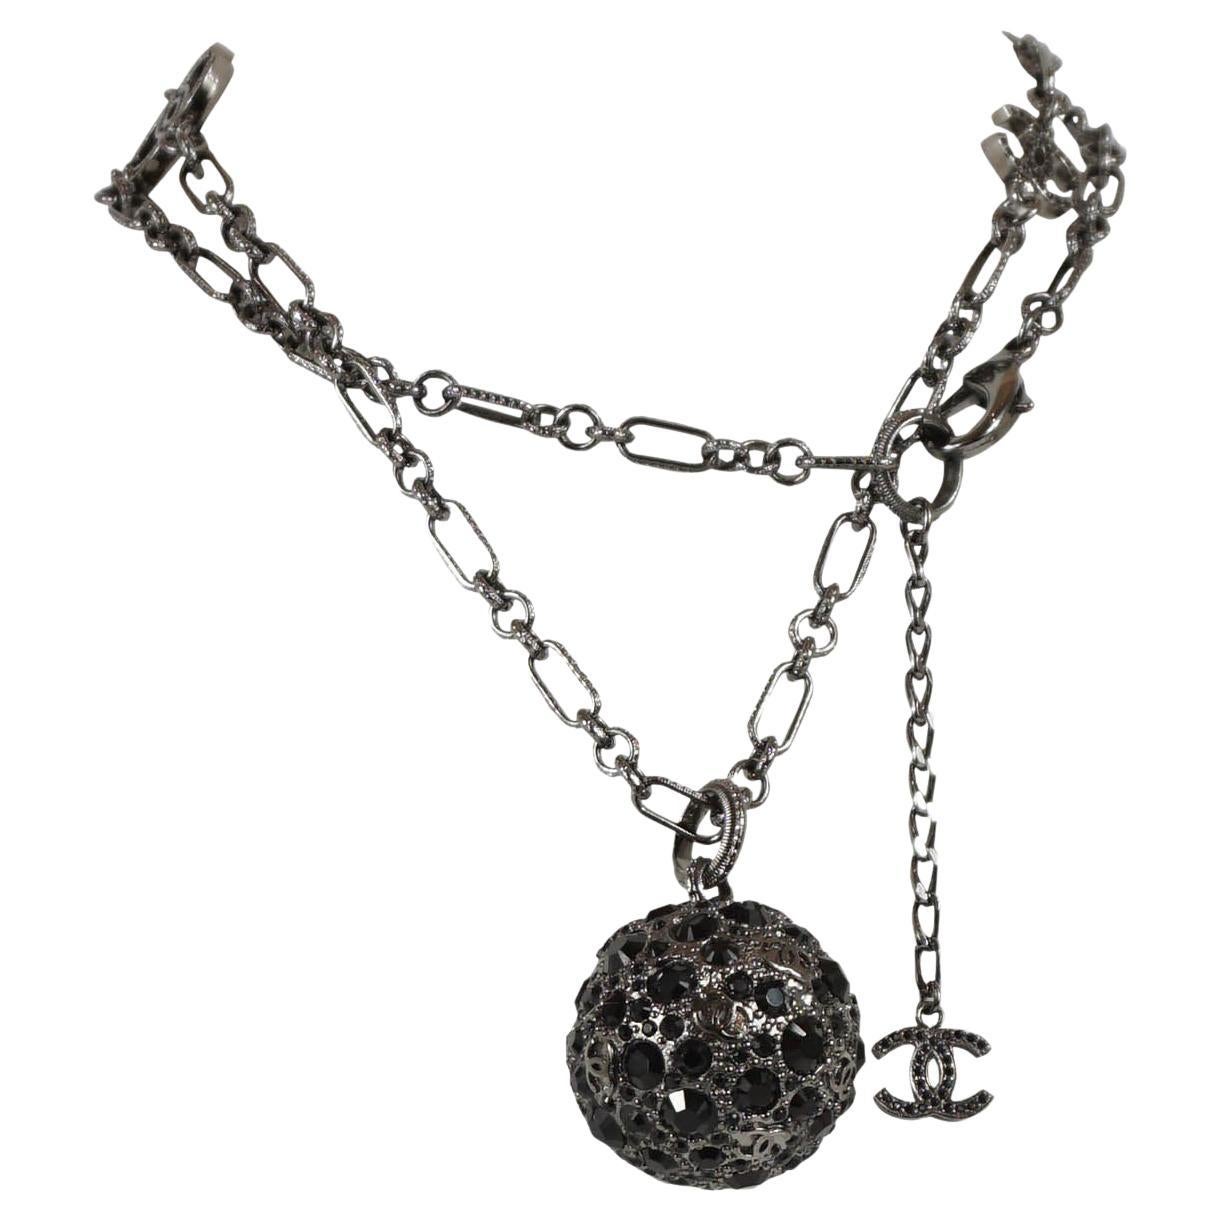 Chanel necklace, from their 2007 Autumn Collection, features a black strass chain with a blackened silver ball pendant encrusted with black crystals and an interlocking CC logo. Chain has gunmetal hardware, interlocking CC logos and black strass